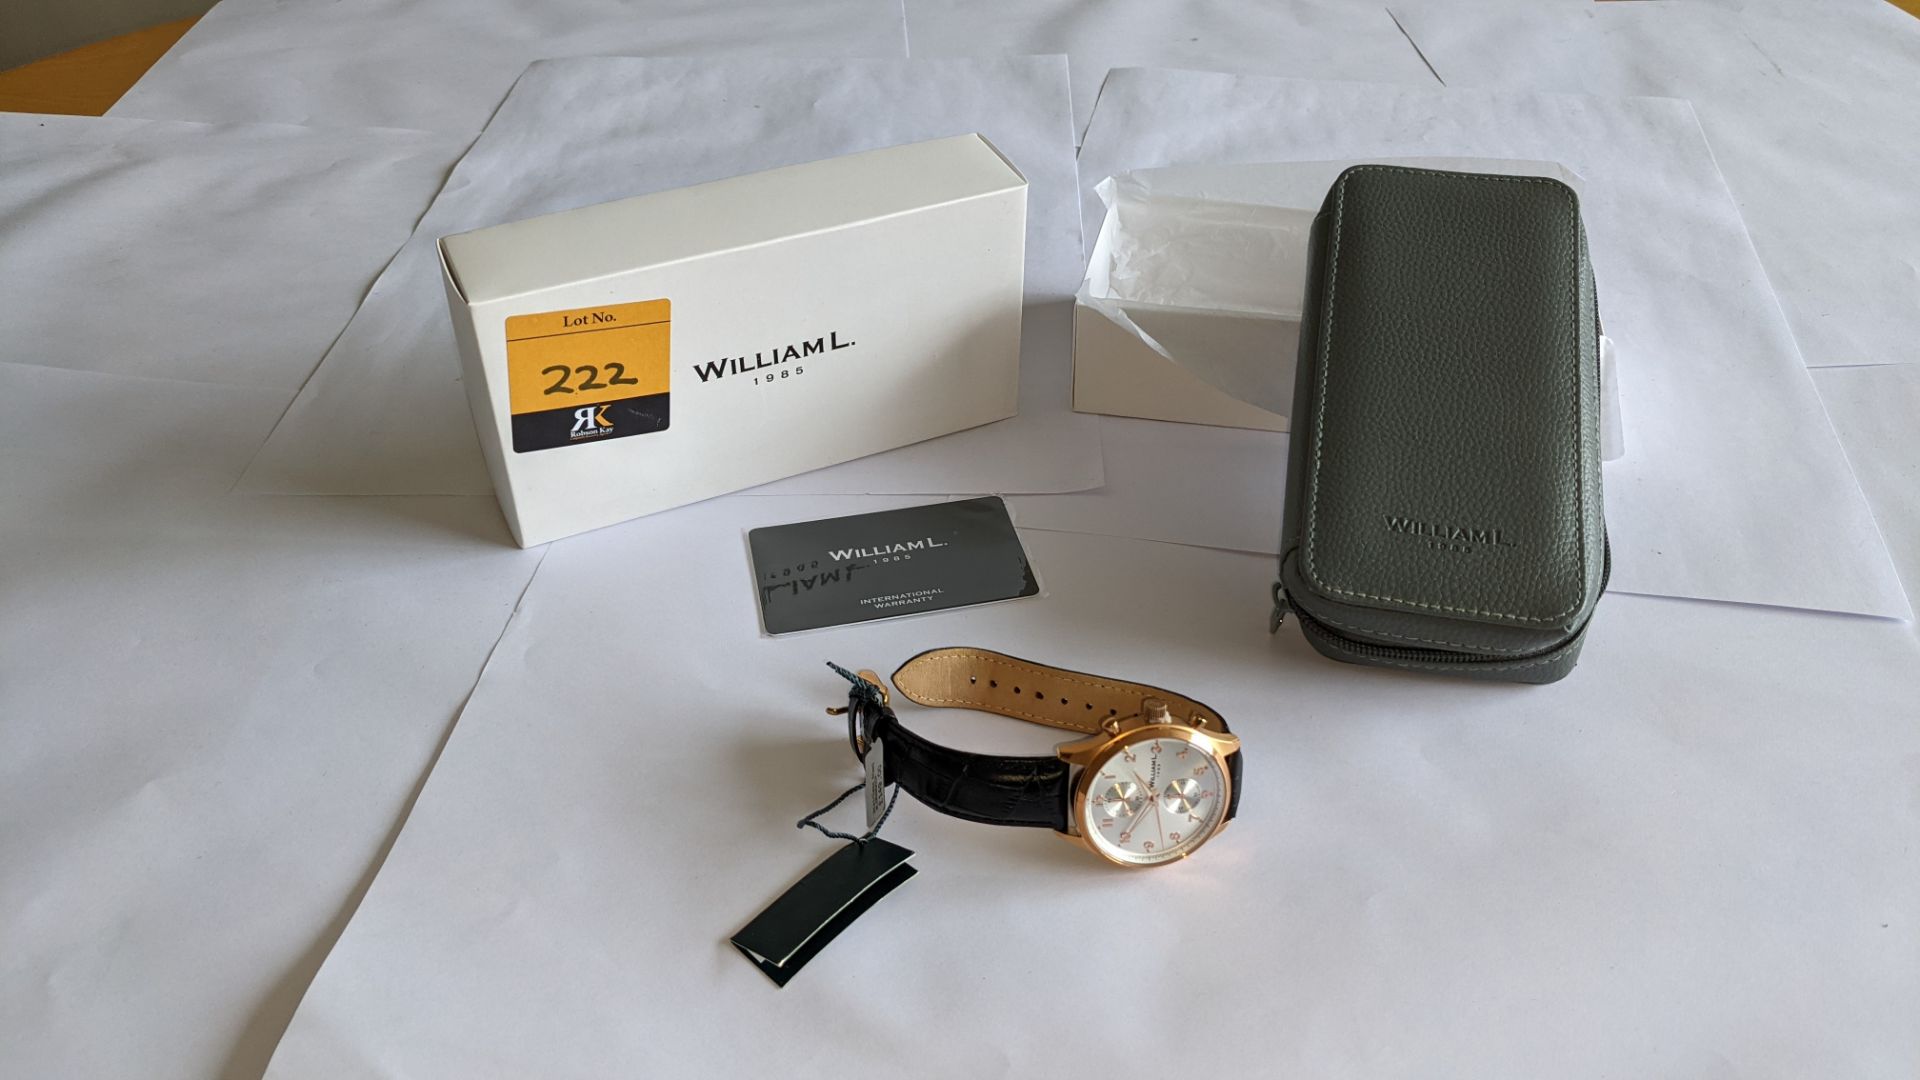 William L 1985 stainless steel watch, 5 ATM water resistant, leather strap, RRP £149. Includes box - Image 13 of 13